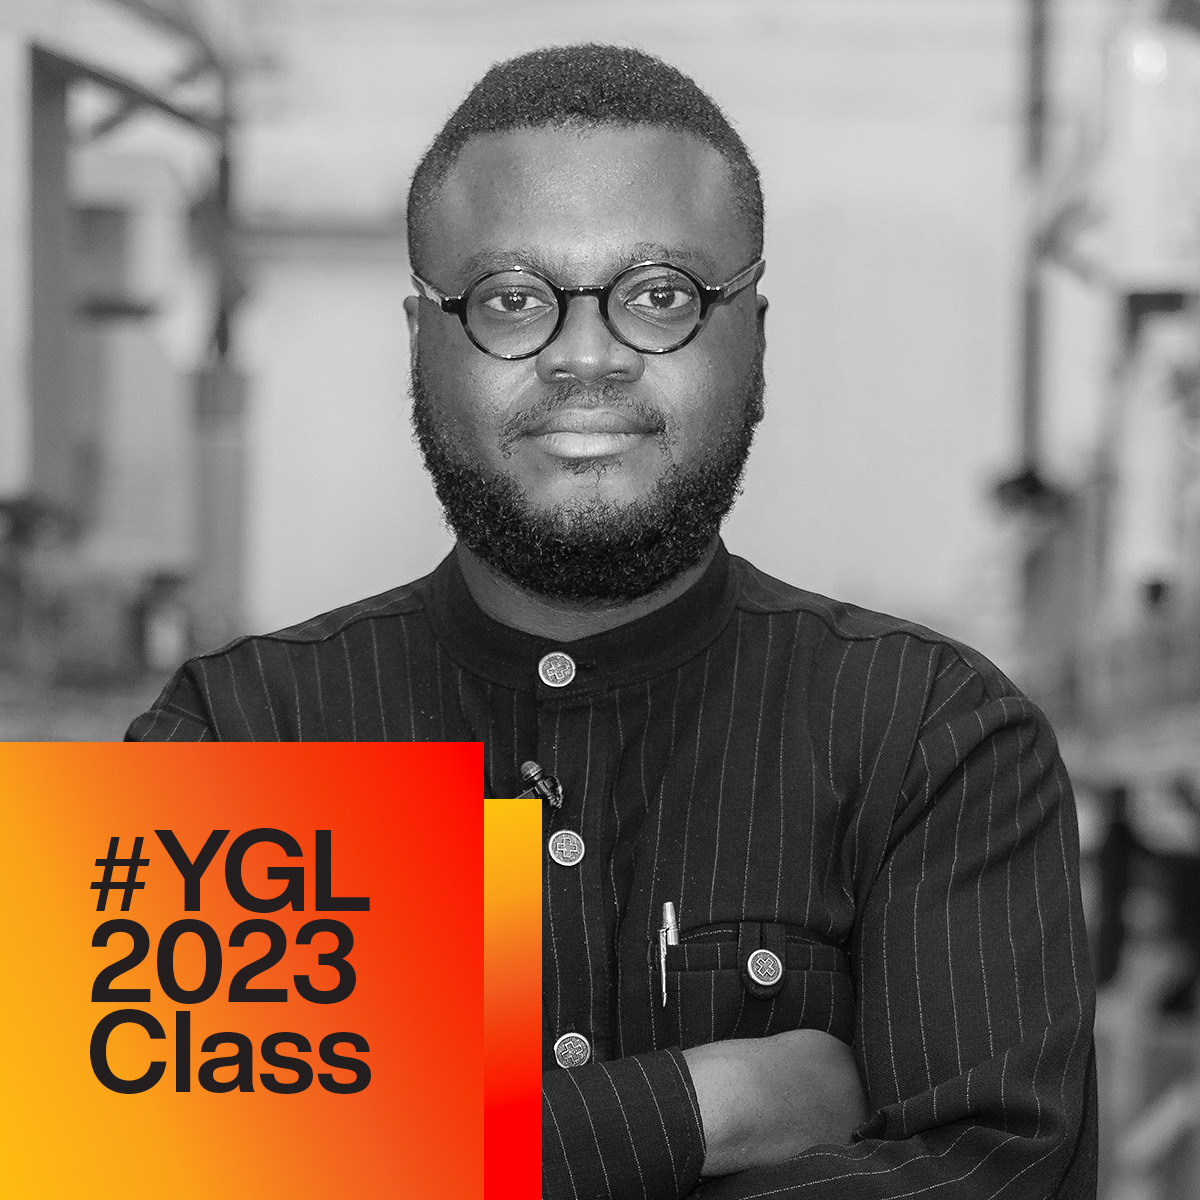 We are excited to announce that our CEO and Co-Founder, @Rockson2 has been honoured as a World Economic Forum Young Global Leader (YGL). Click the link to learn more: younggloballeaders.org/new-class #YGL23 #WEF